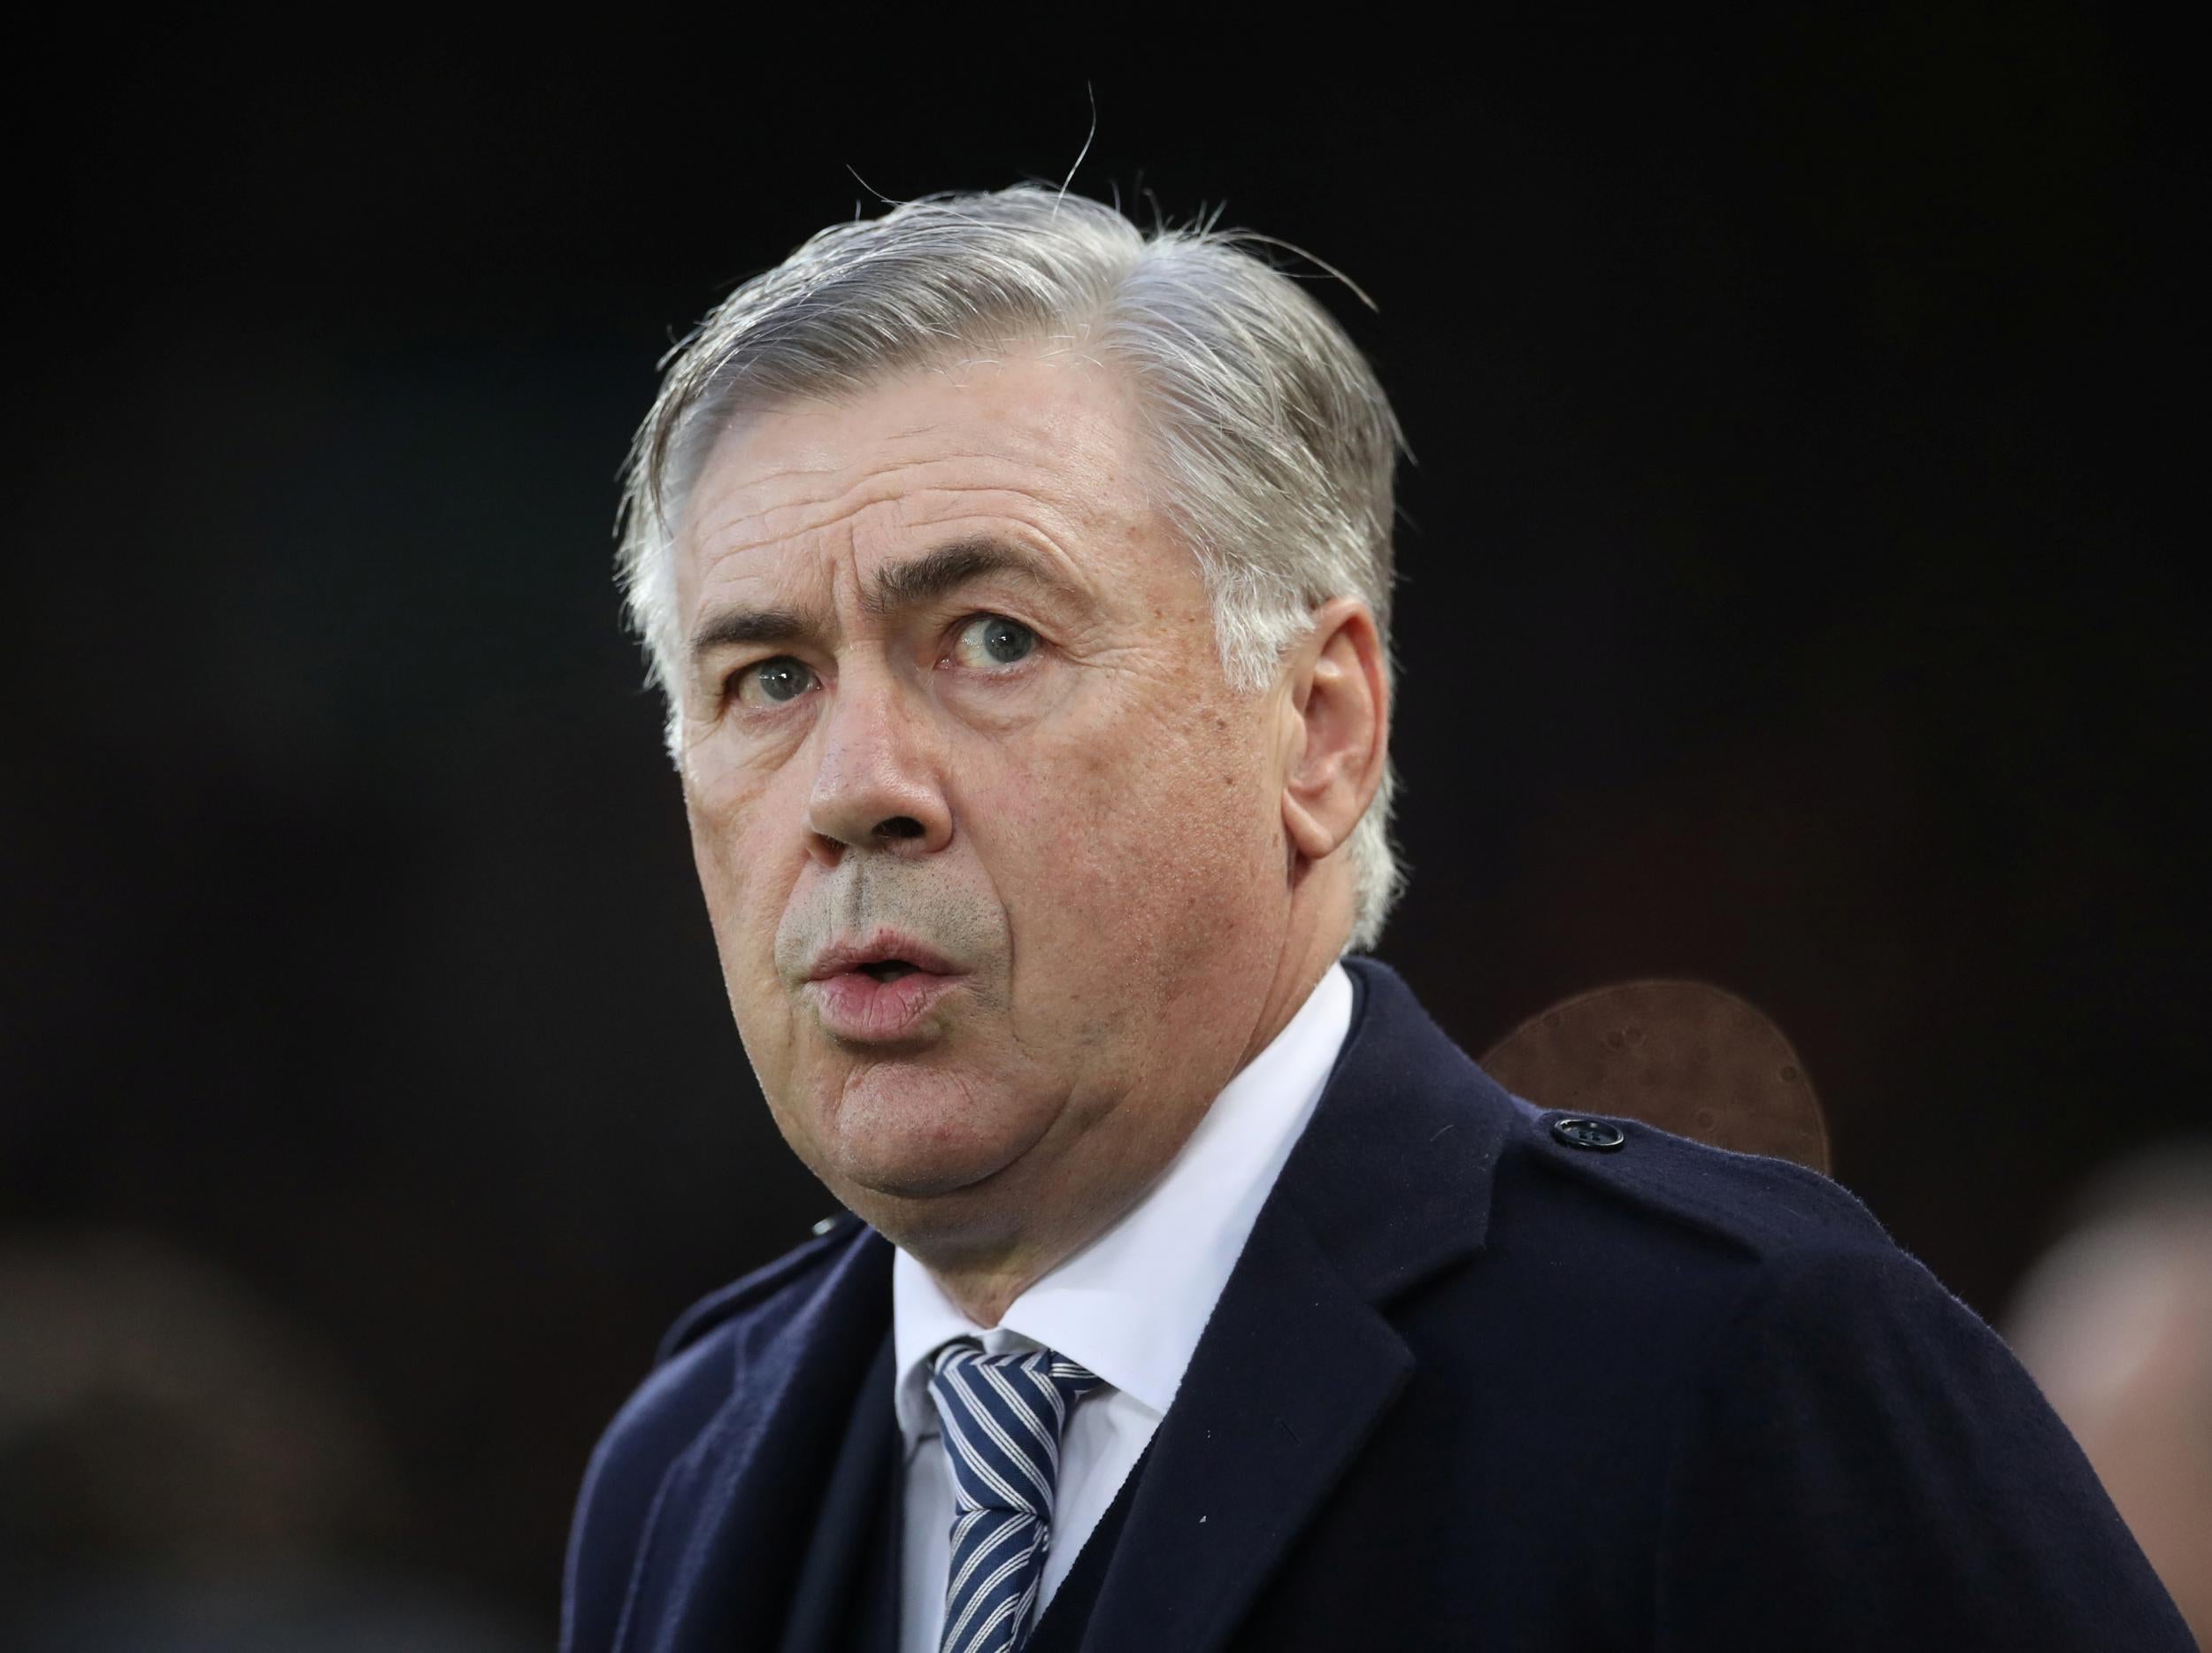 Carlo Ancelotti and Everton players accept wage deferrals of up to 50 per cent during coronavirus shutdown